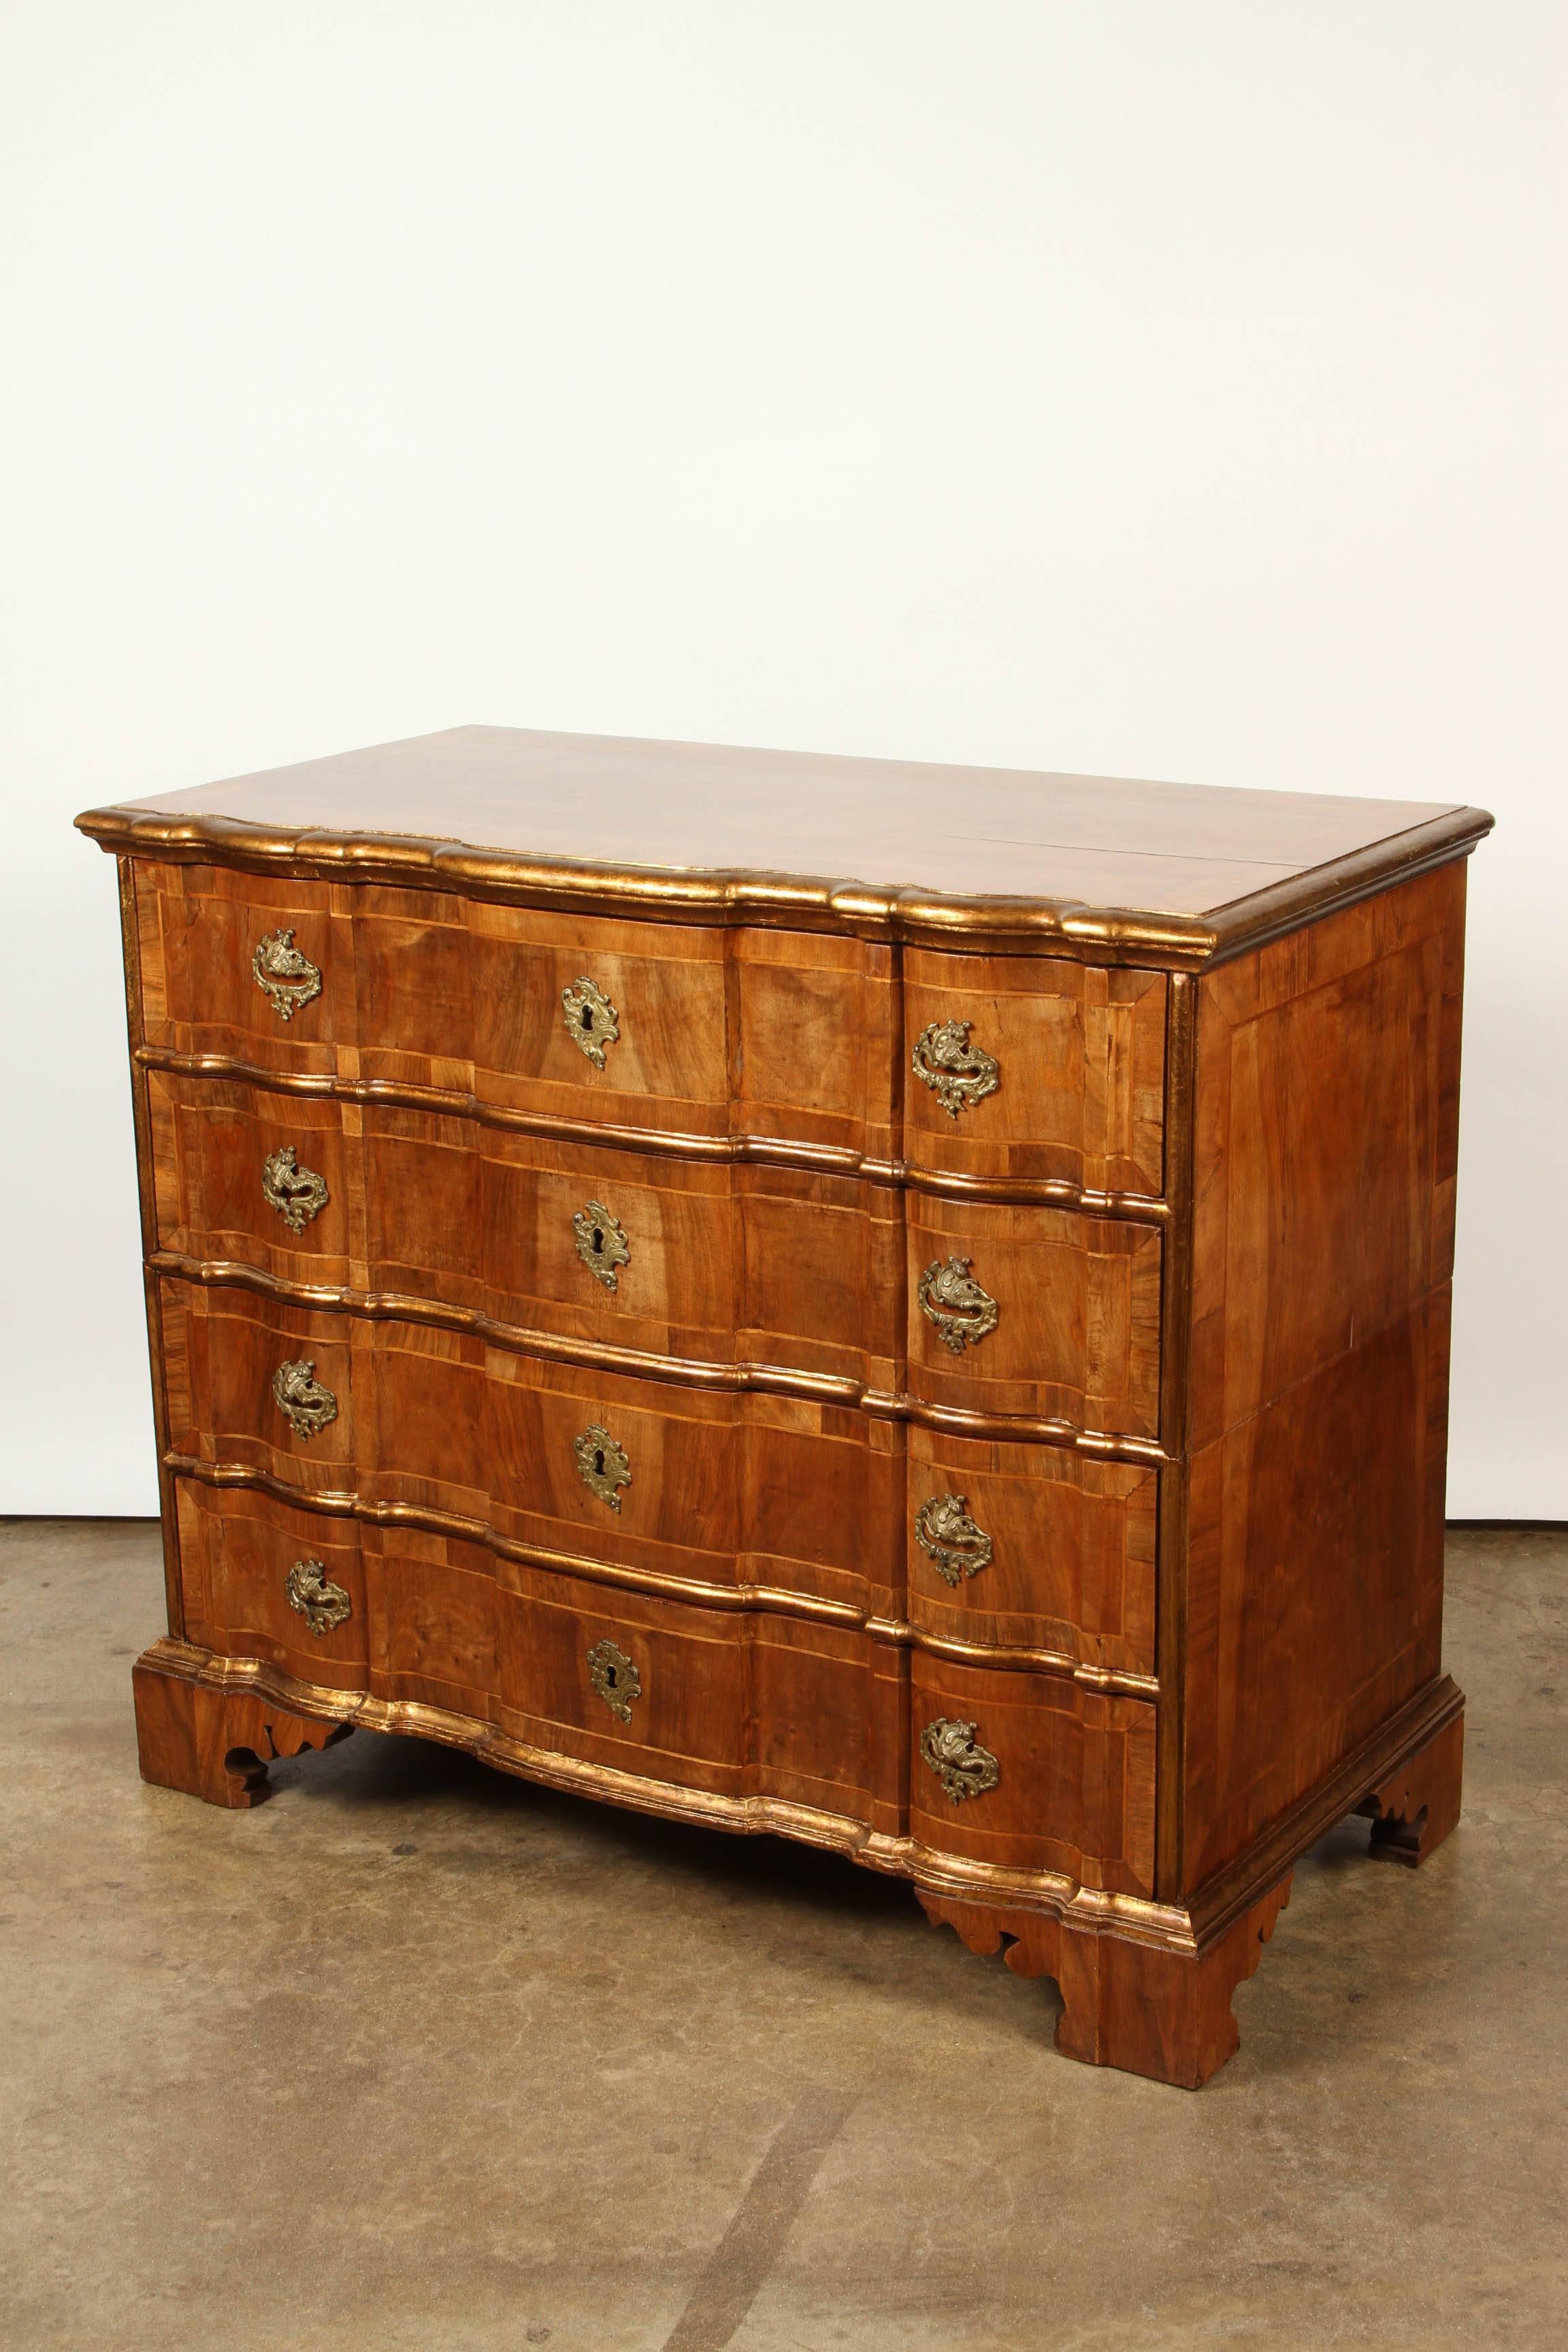 Danish Rococo chest of drawers with key 1